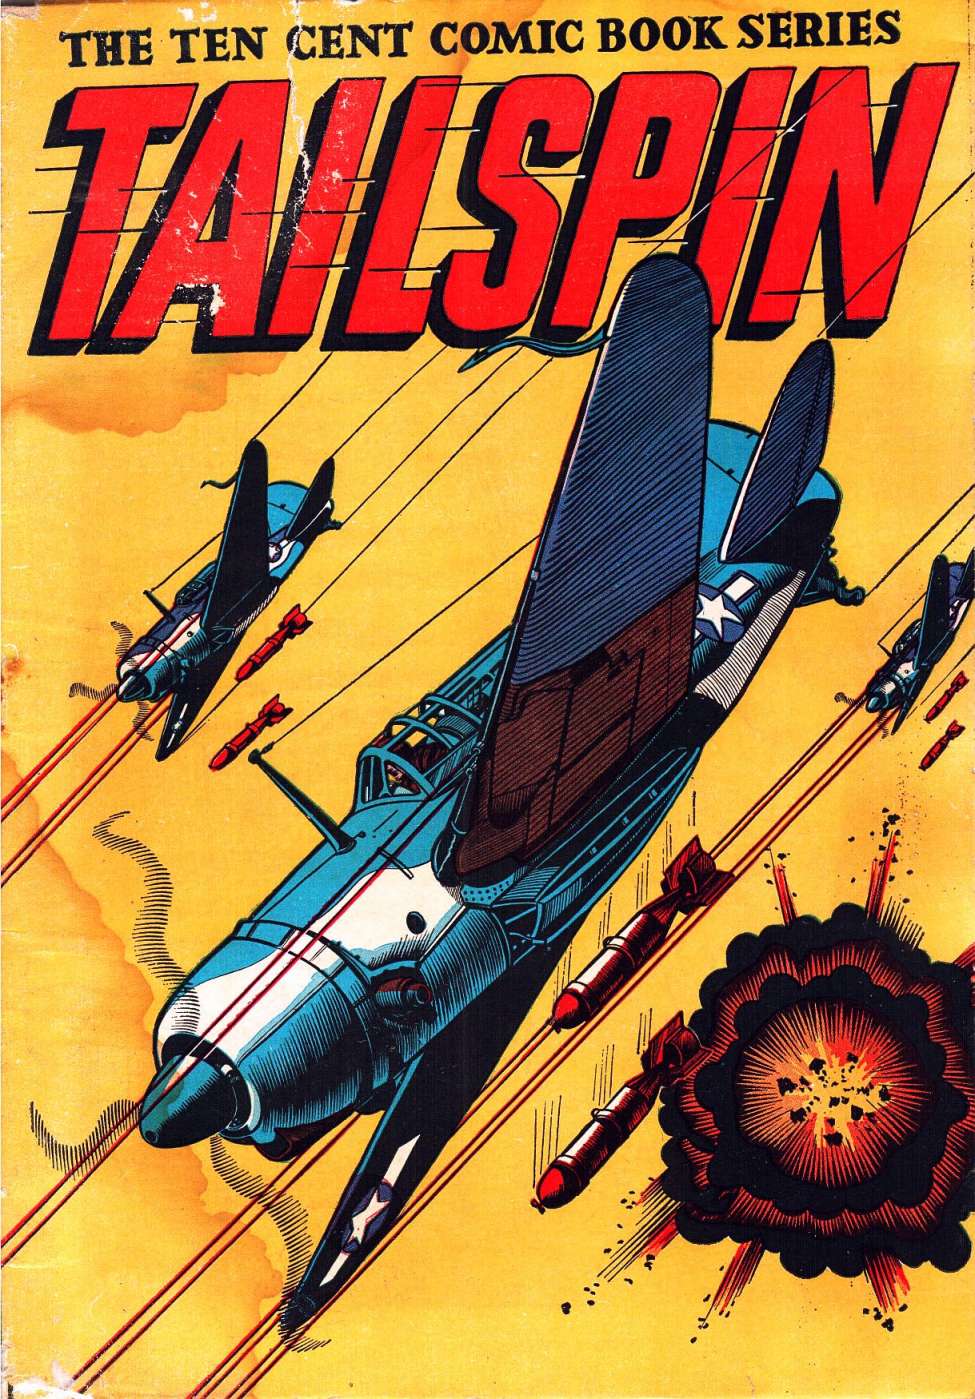 Book Cover For Tailspin Comics